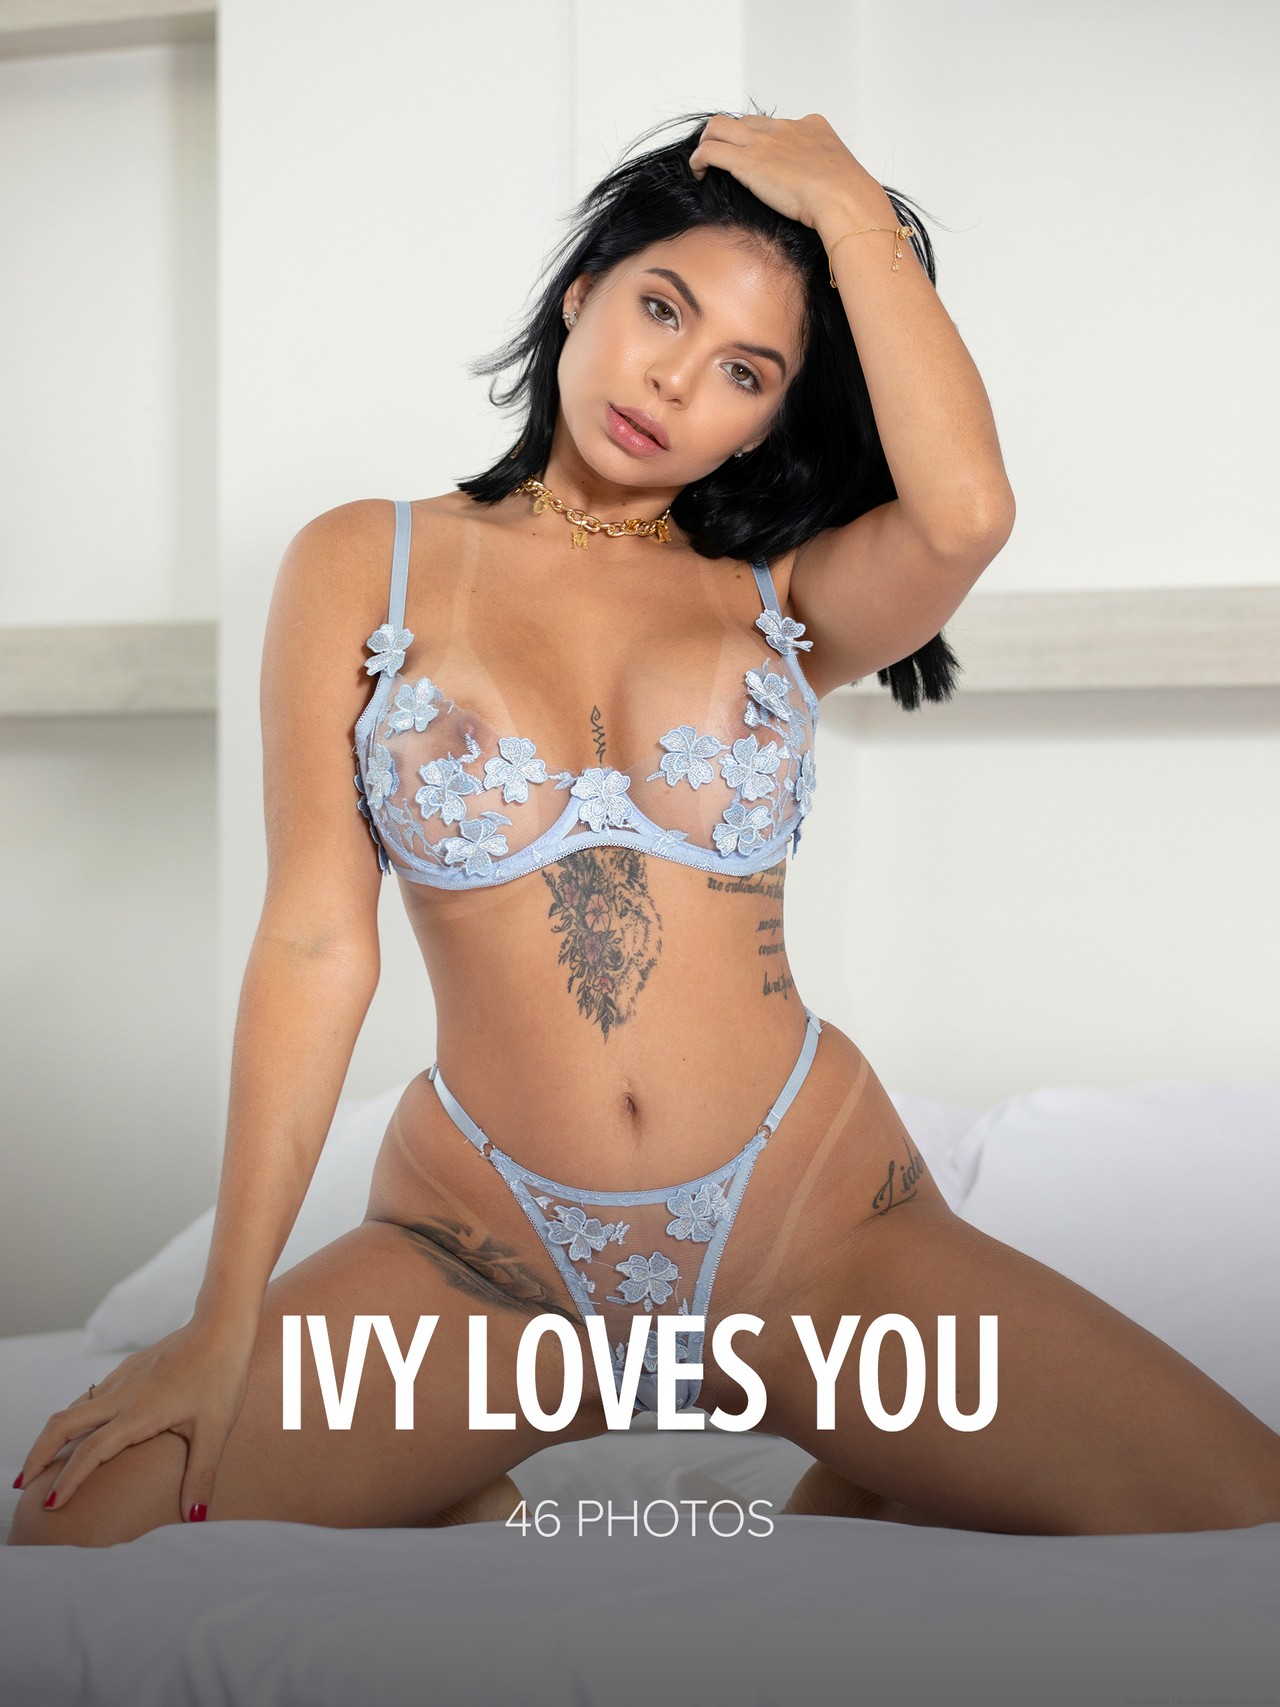 W4B’s sexy Colombian, Jolie Star is out again to fulfill every man’s dream, with her full breasts and juicy lips. In this photo session she strips from sexy lingerie down to her beautiful naked skin, showing us just why so many man love to watch and admire her.